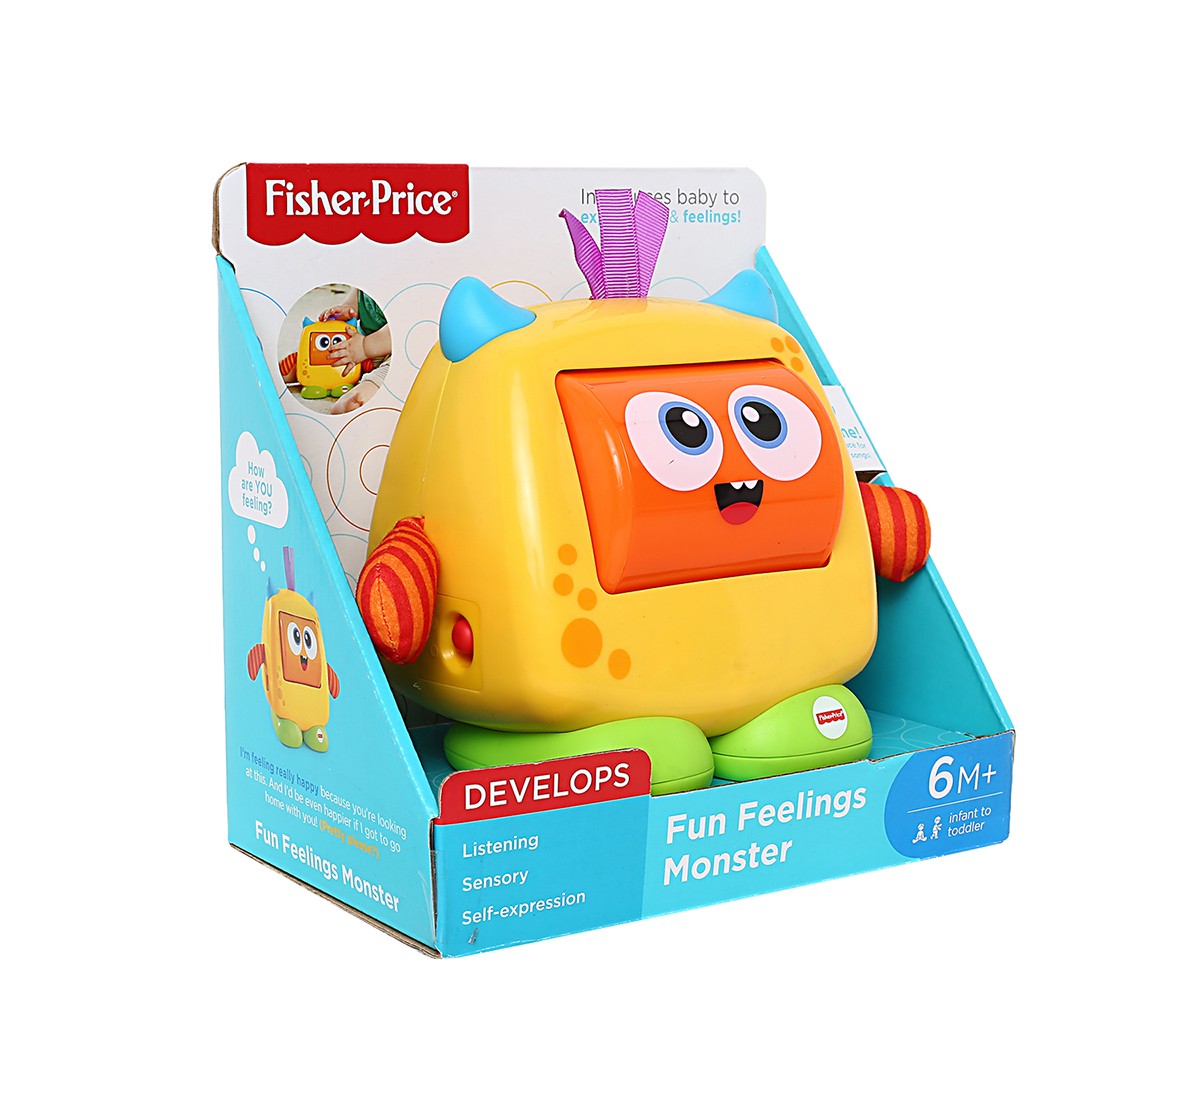 Fisher Price Feelings Monster, Multi Color Early Learner Toys for Kids age 6M+ 